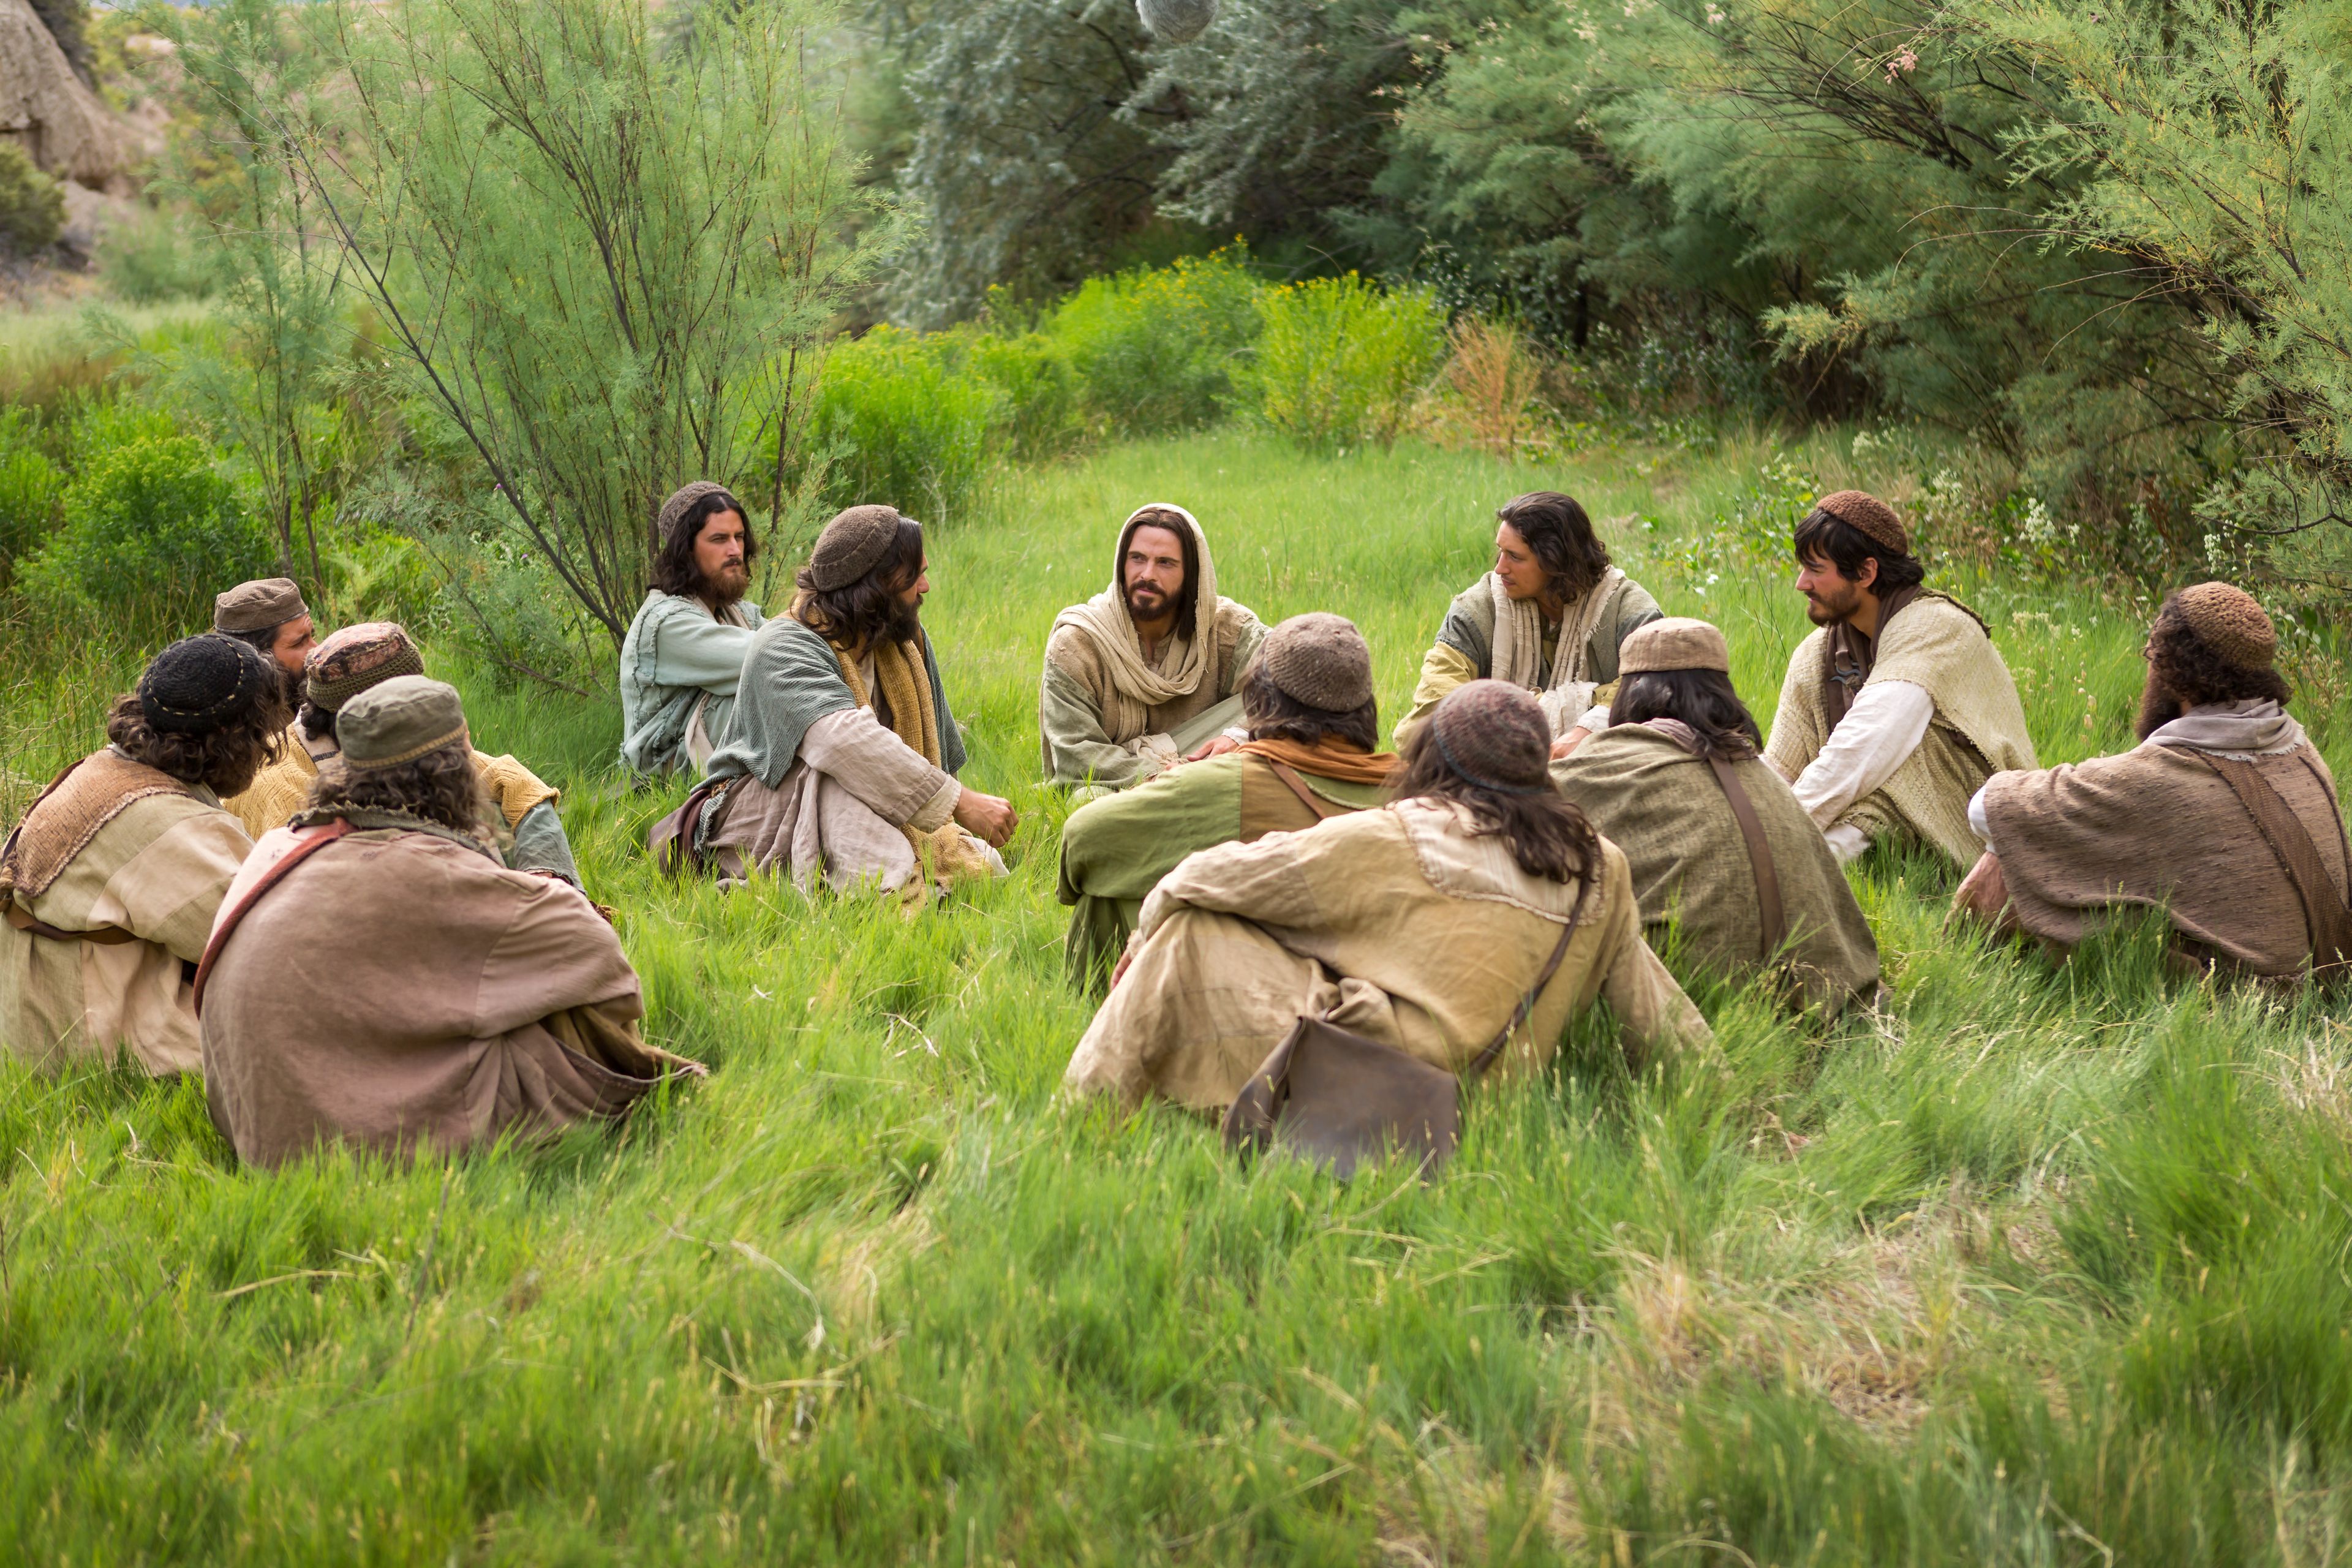 Jesus asks His disciples, "Whom do men say that I the Son of Man am?"